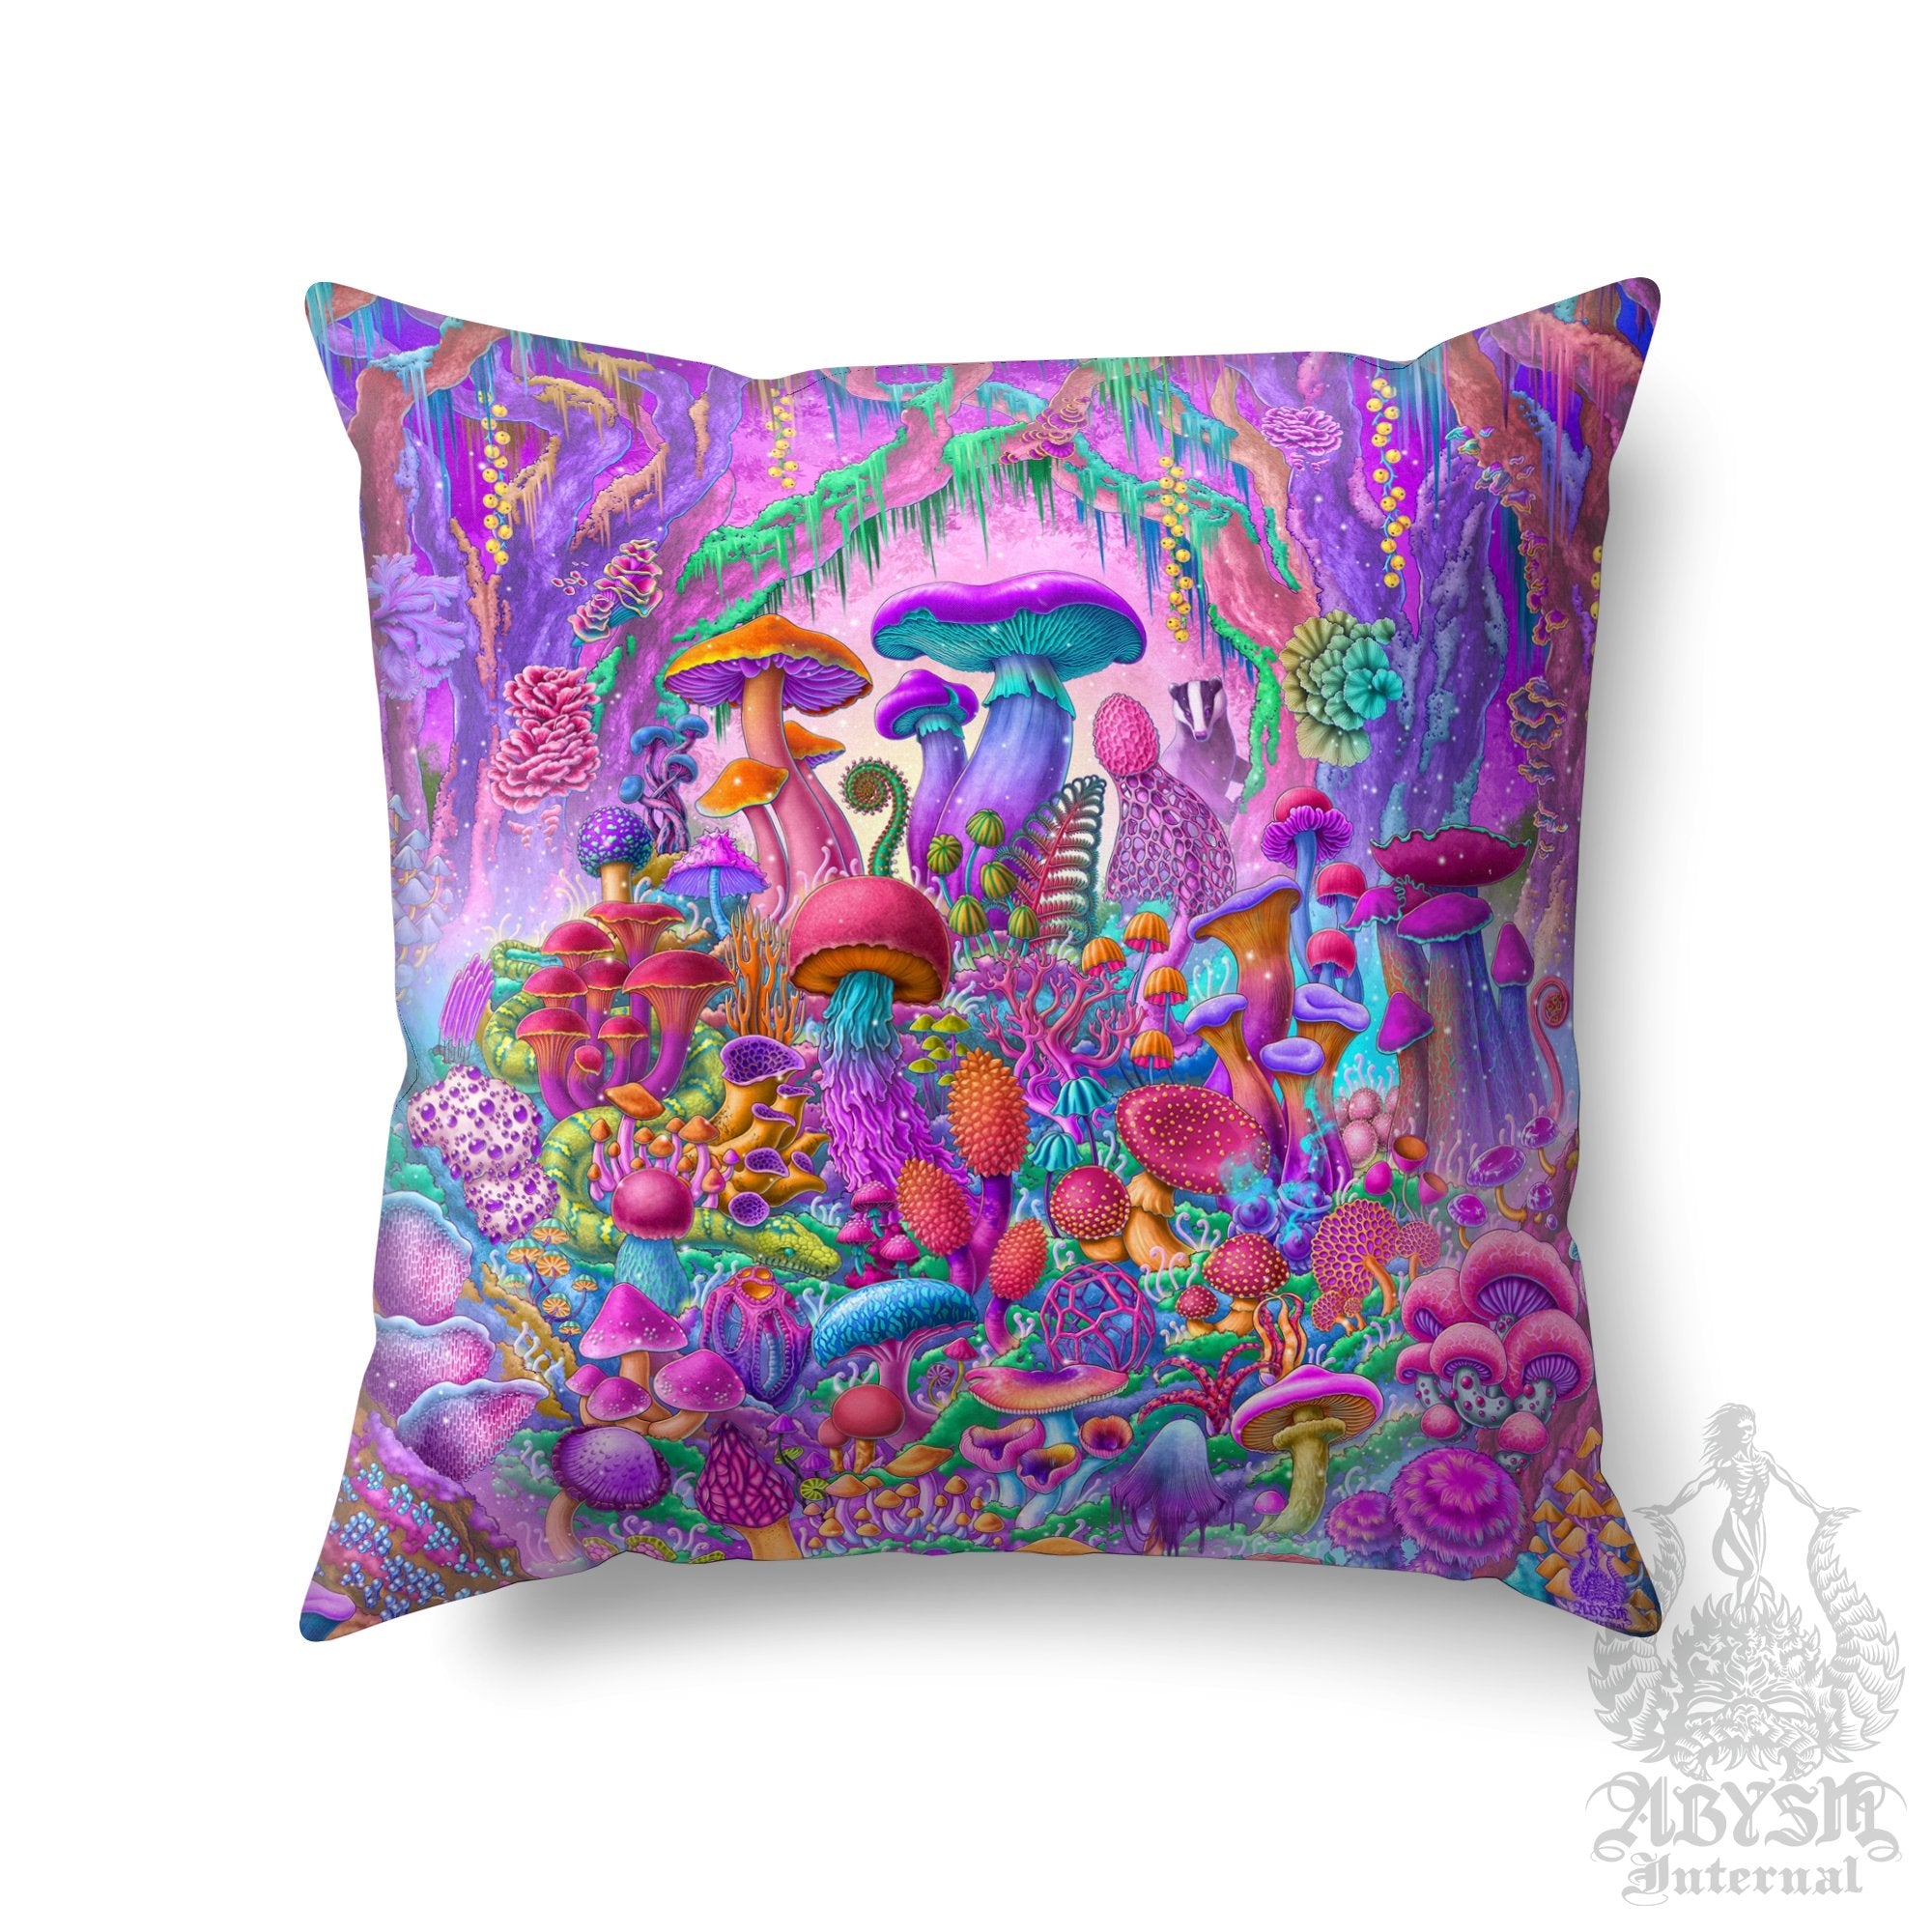 Mushrooms Throw Pillow, Aesthetic Decorative Accent Cushion, Pastel Girl's Room Decor, Psychedelic Magic Shrooms Art Print - Abysm Internal